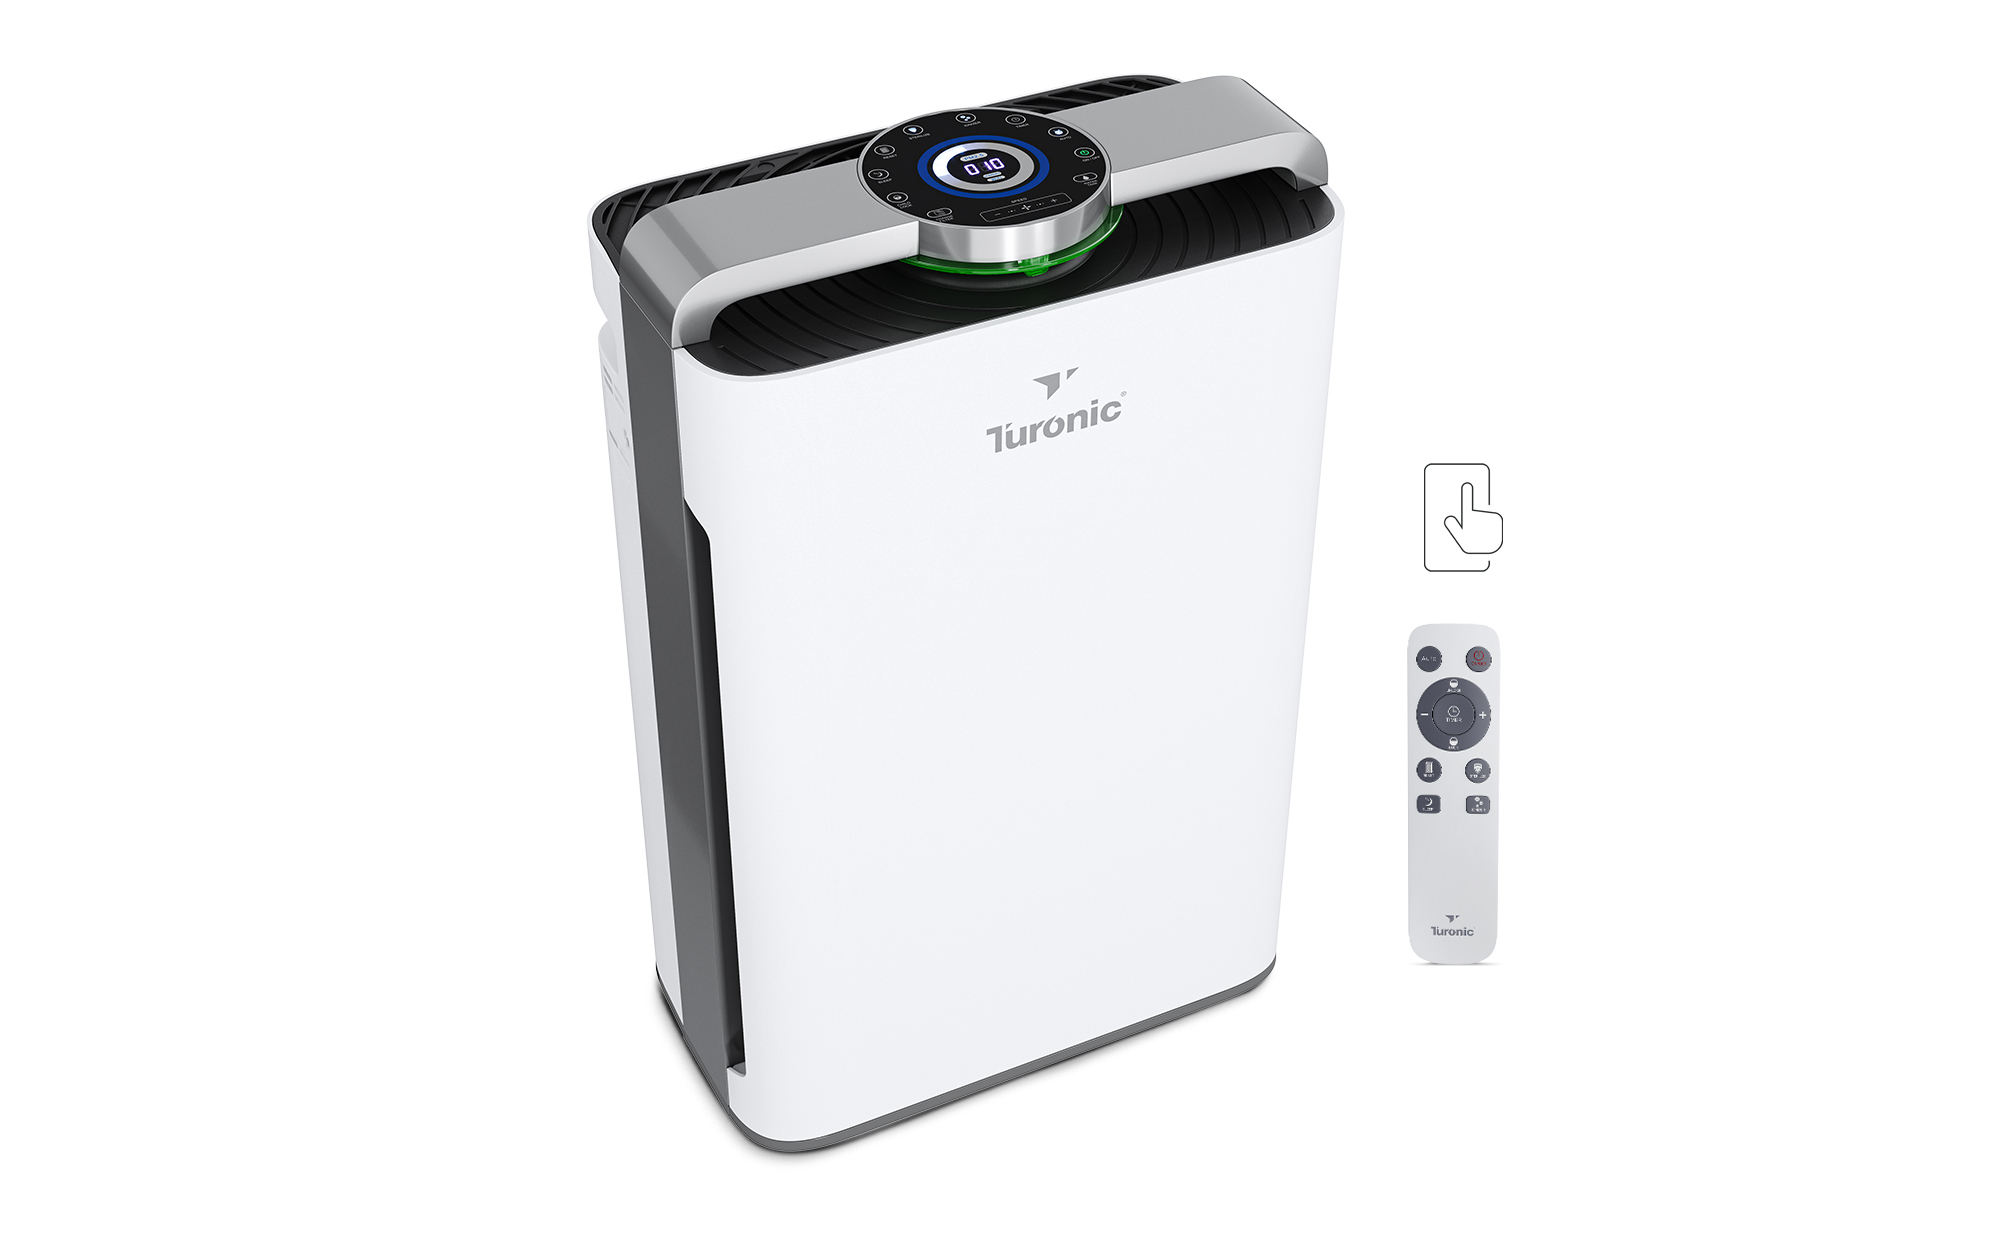 Our test of the Turonic PH950 air purifier